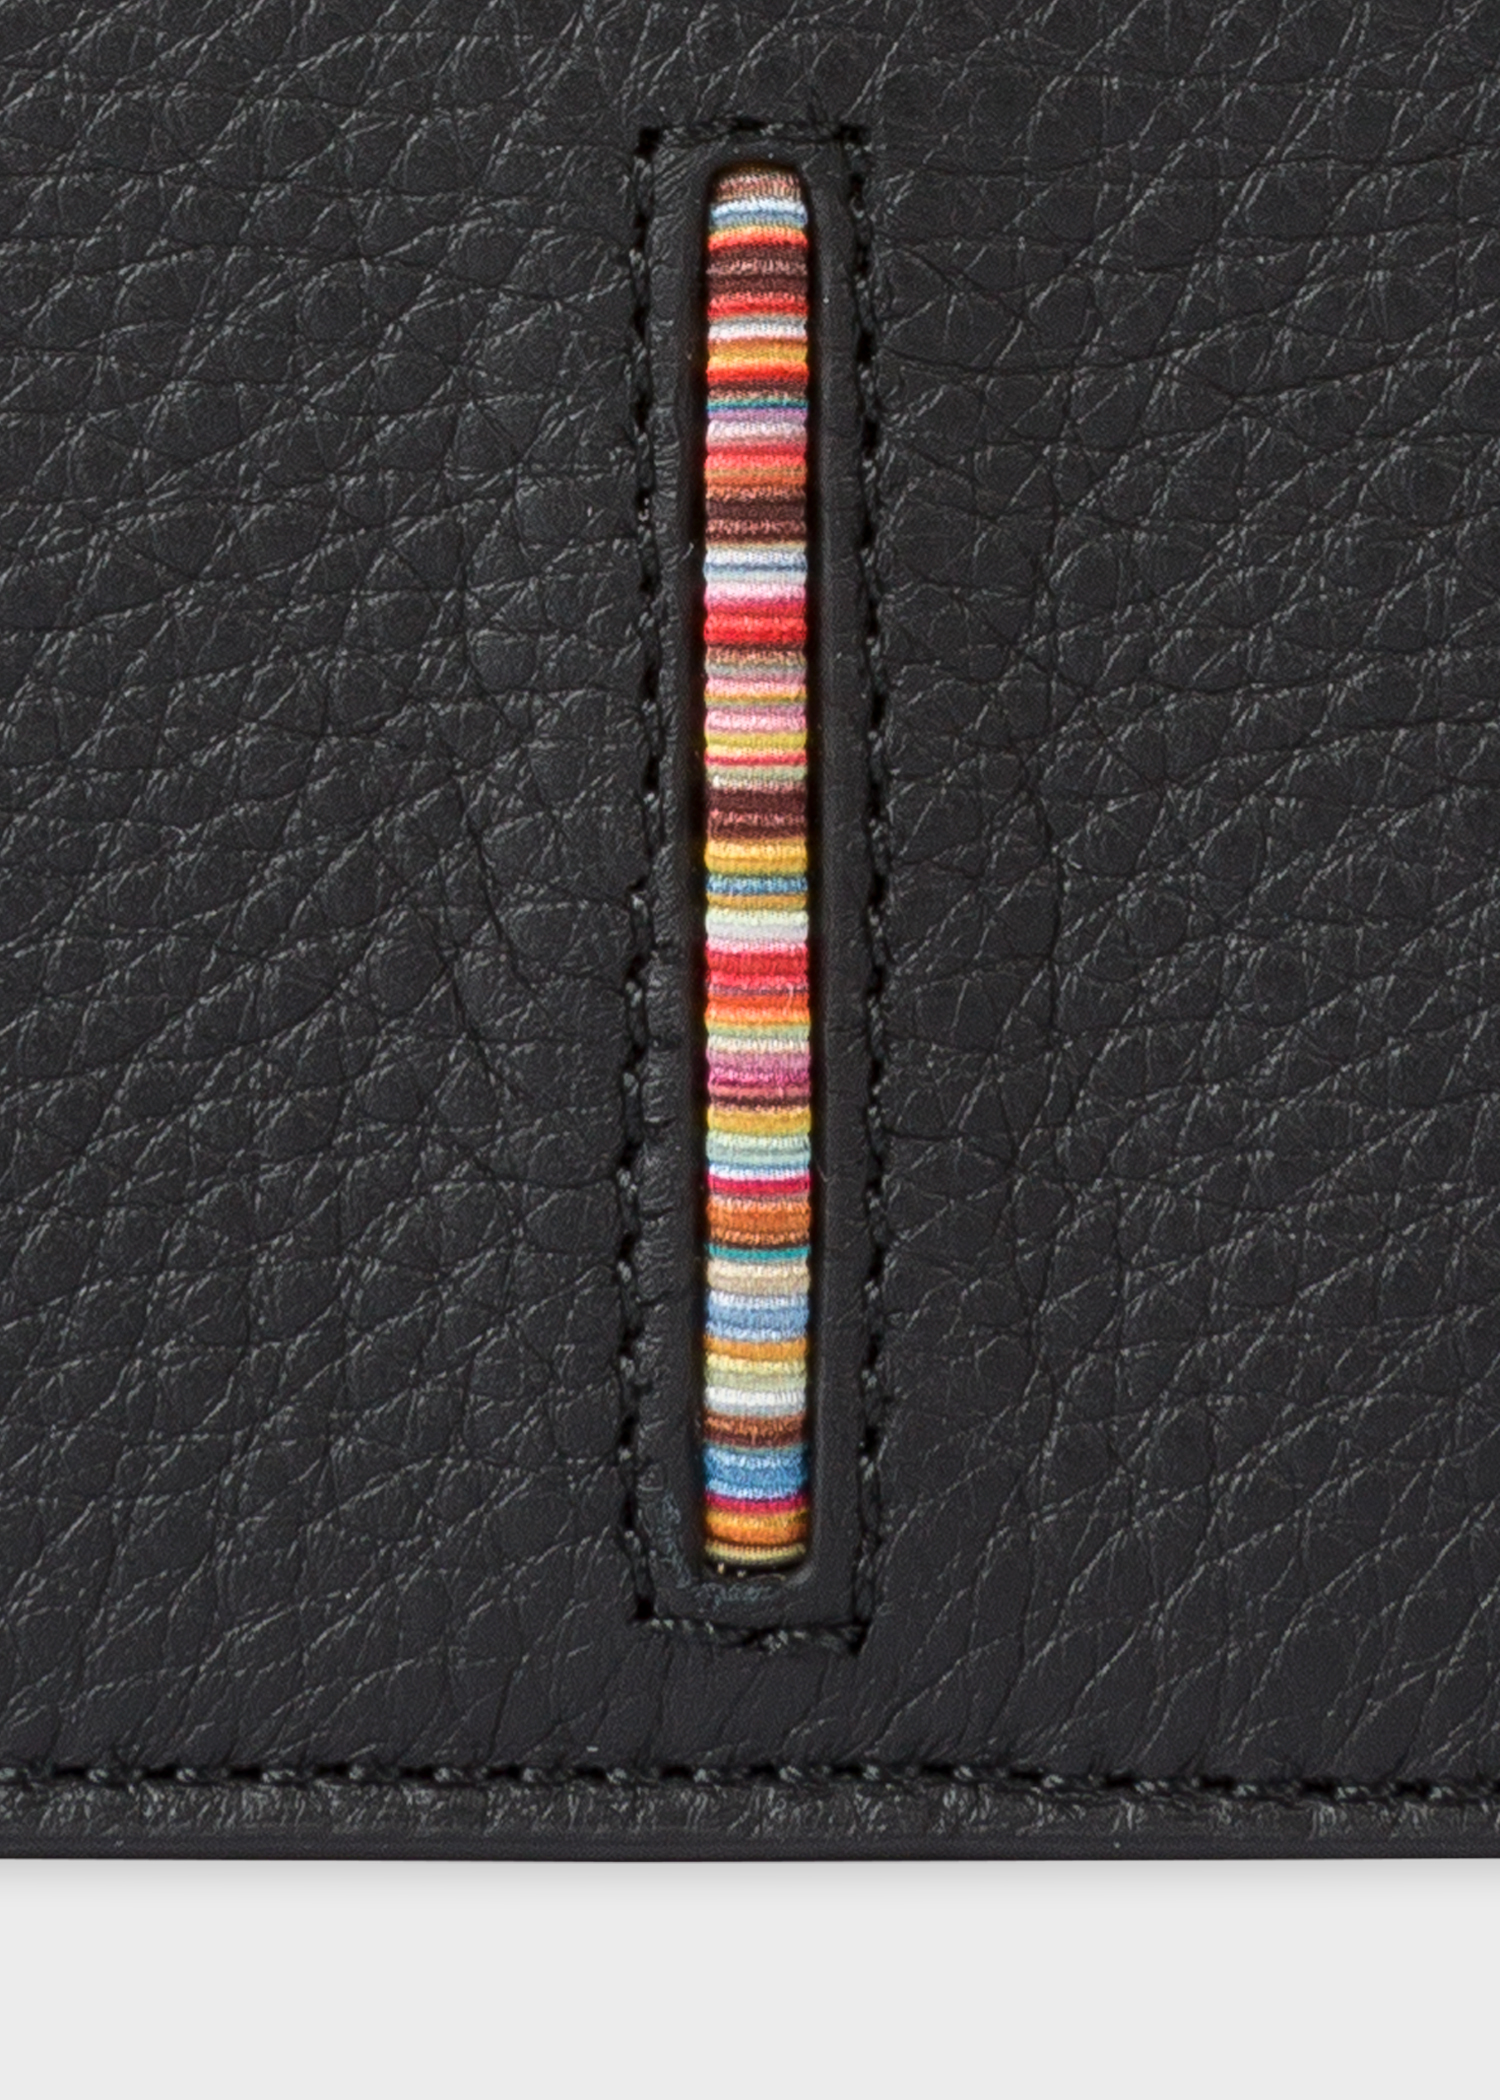 Detail view - Men's Black Leather Credit Card Holder Paul Smith